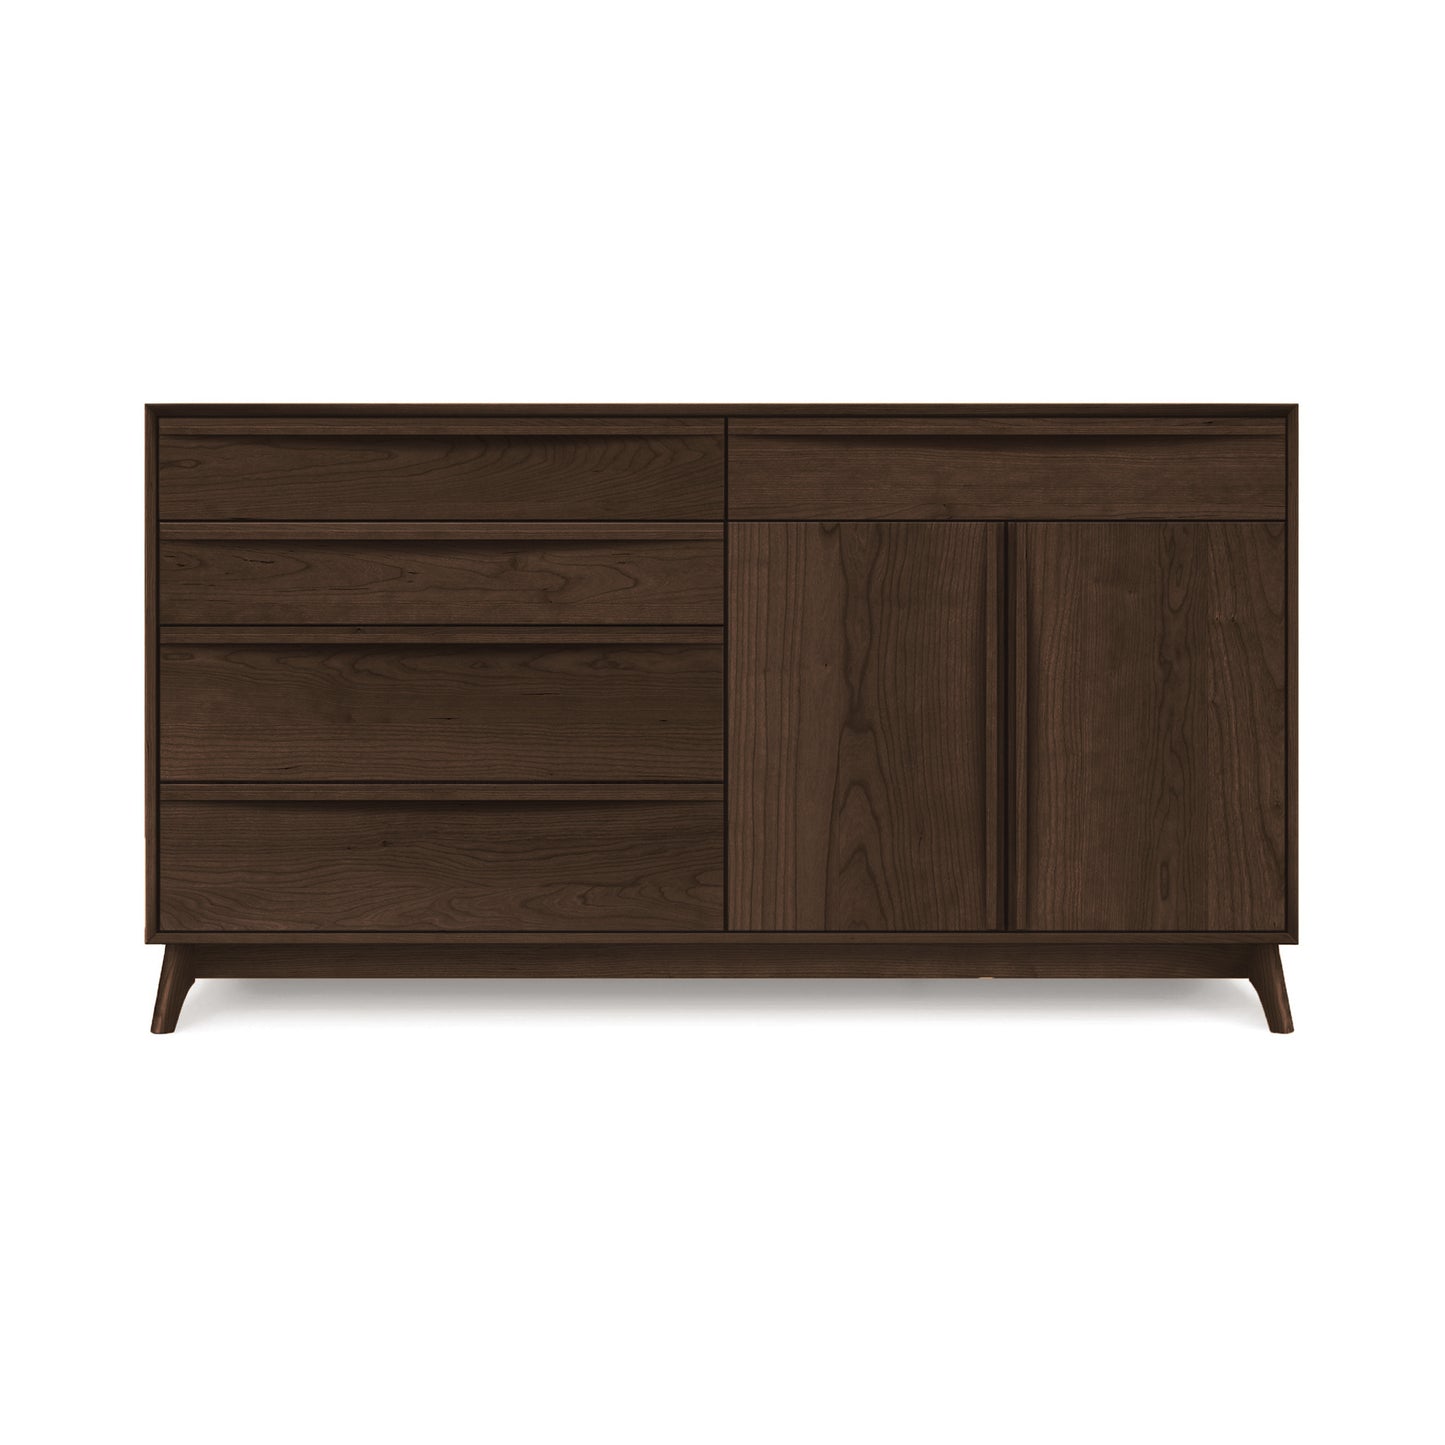 A modern Catalina 5-Drawer, 2-Door Buffet with a simple design featuring three drawers on the left and a cabinet section on the right, all perched on four slender legs. (Copeland Furniture)